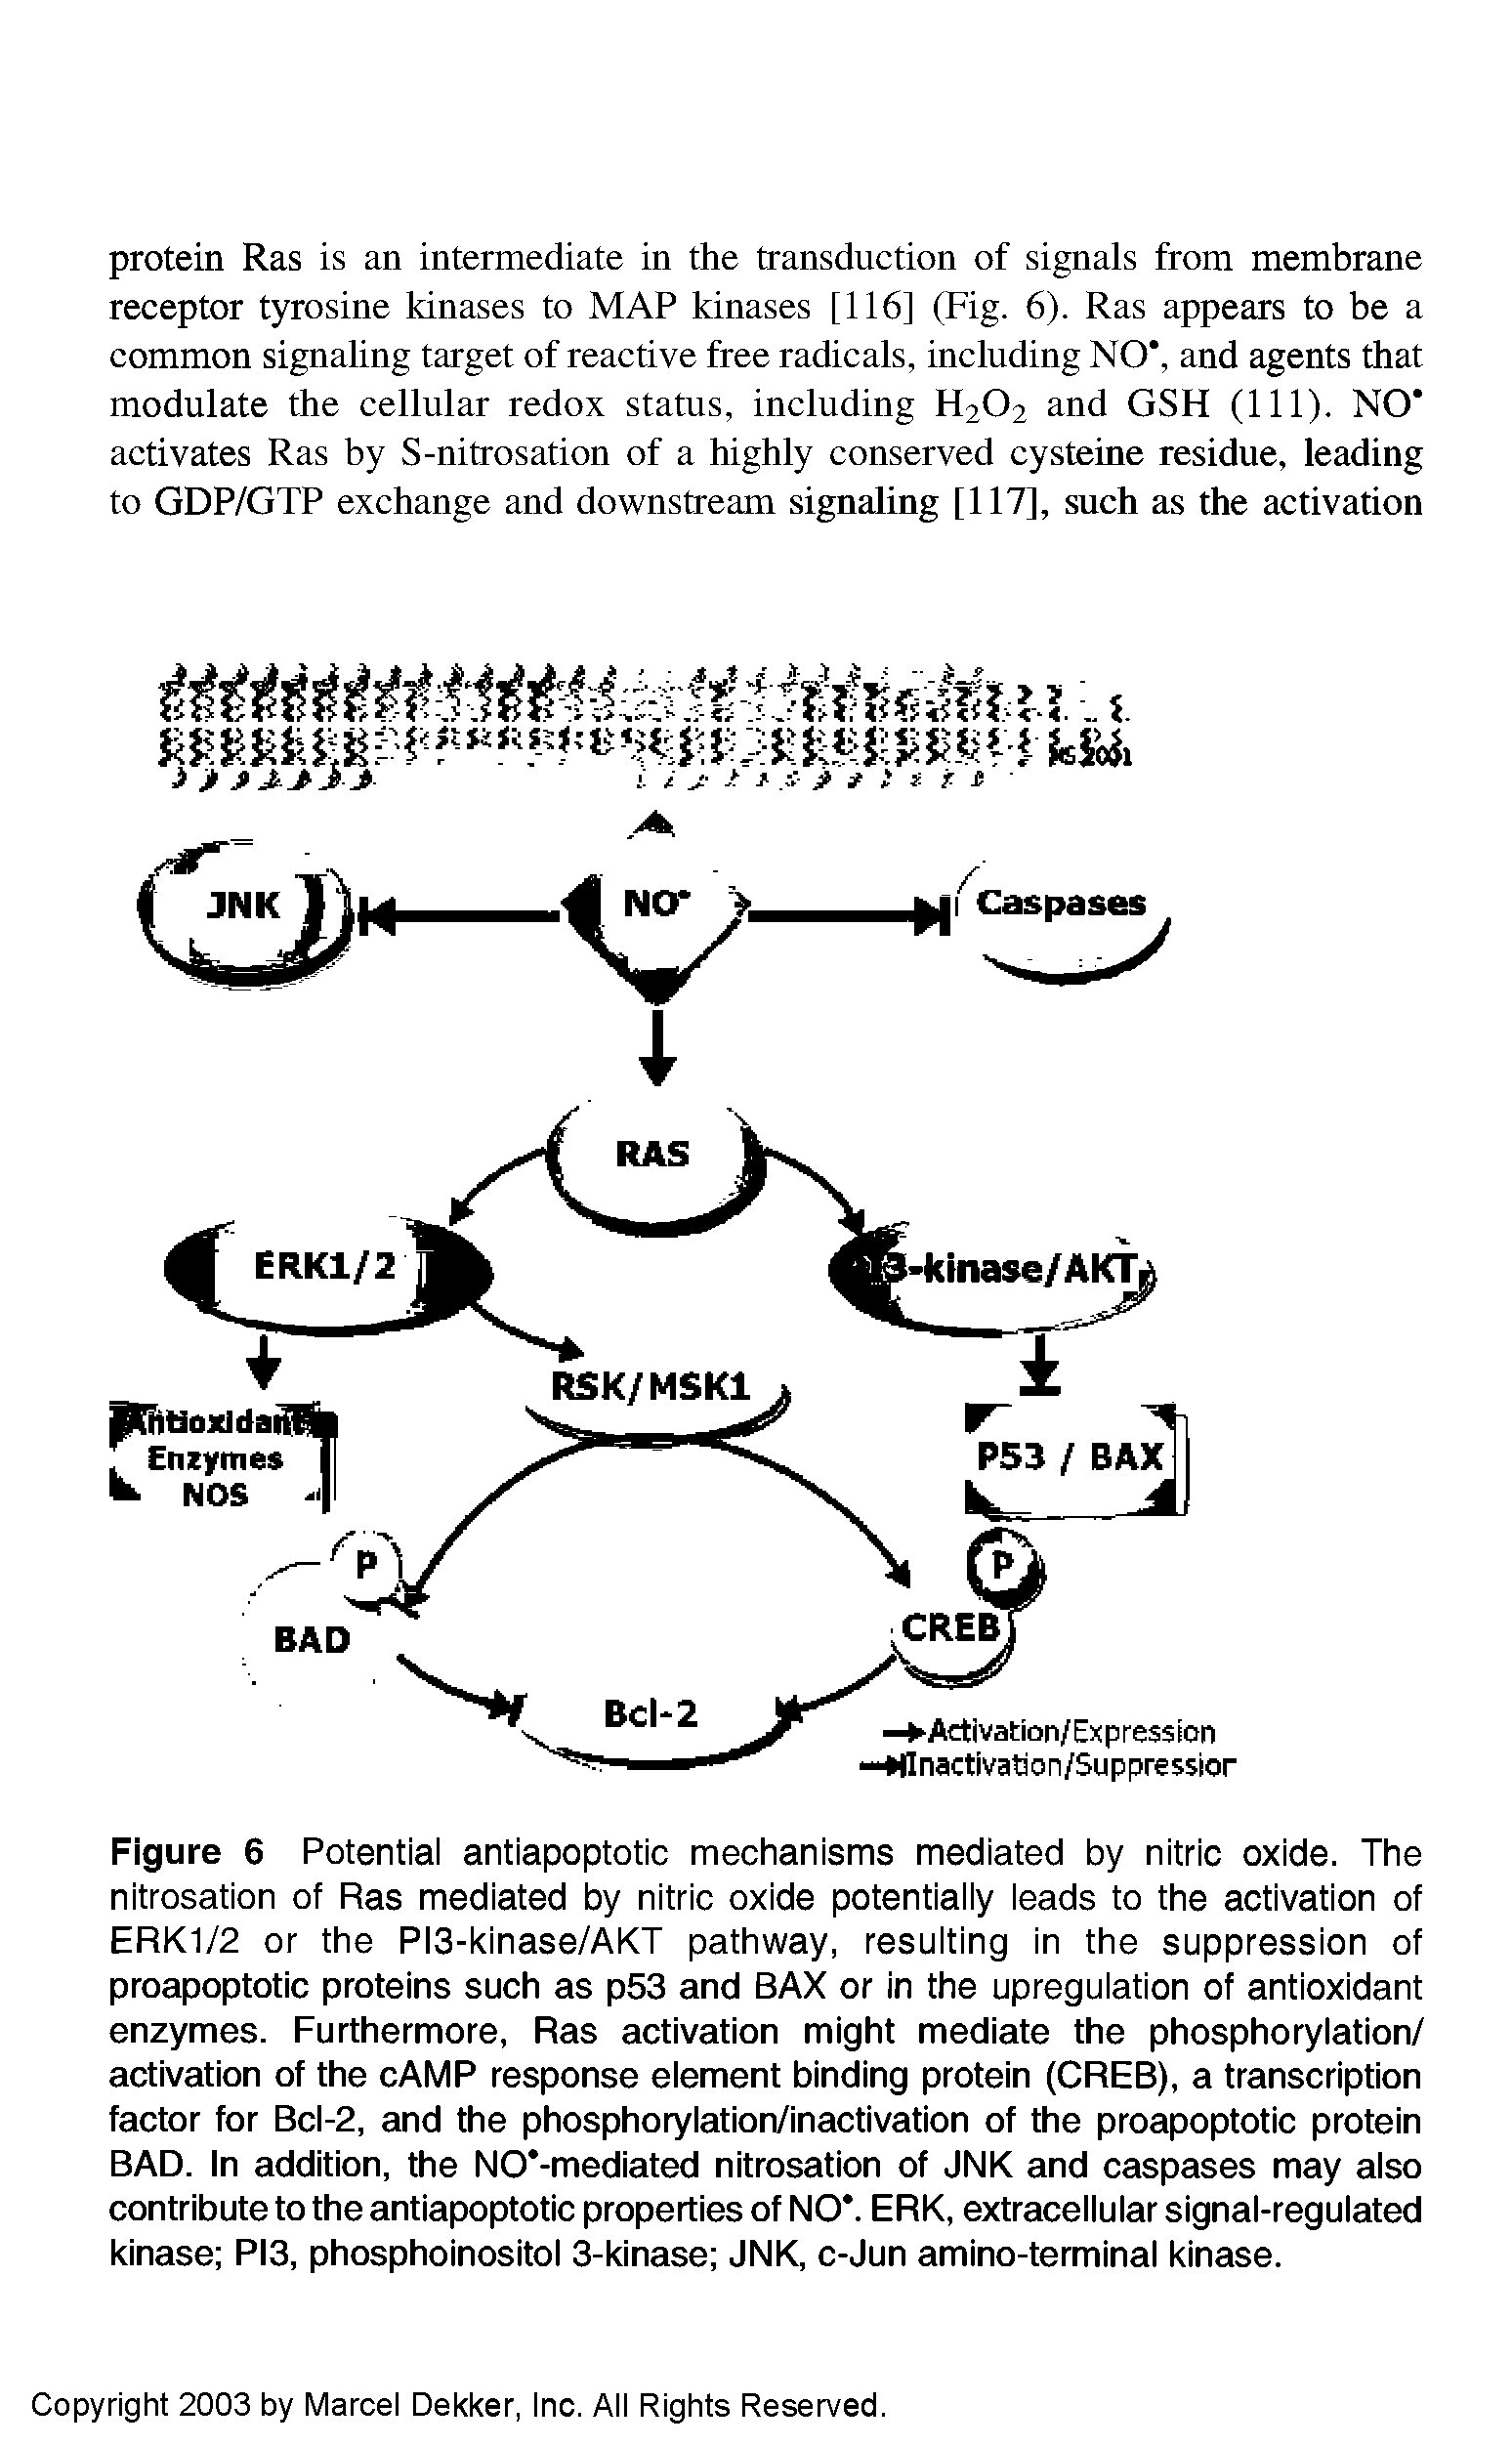 Figure 6 Potential antiapoptotic mechanisms mediated by nitric oxide. The nitrosation of Ras mediated by nitric oxide potentially leads to the activation of ERK1/2 or the PI3-kinase/AKT pathway, resulting in the suppression of proapoptotic proteins such as p53 and BAX or in the upregulation of antioxidant enzymes. Furthermore, Ras activation might mediate the phosphorylation/ activation of the cAMP response element binding protein (CREB), a transcription factor for Bcl-2, and the phosphorylation/inactivation of the proapoptotic protein BAD. In addition, the NO -mediated nitrosation of JNK and caspases may aiso contribute to the antiapoptotic properties of NO. ERK, extraceiiuiar signai-reguiated kinase PI3, phosphoinositoi 3-kinase JNK, c-Jun amino-terminai kinase.